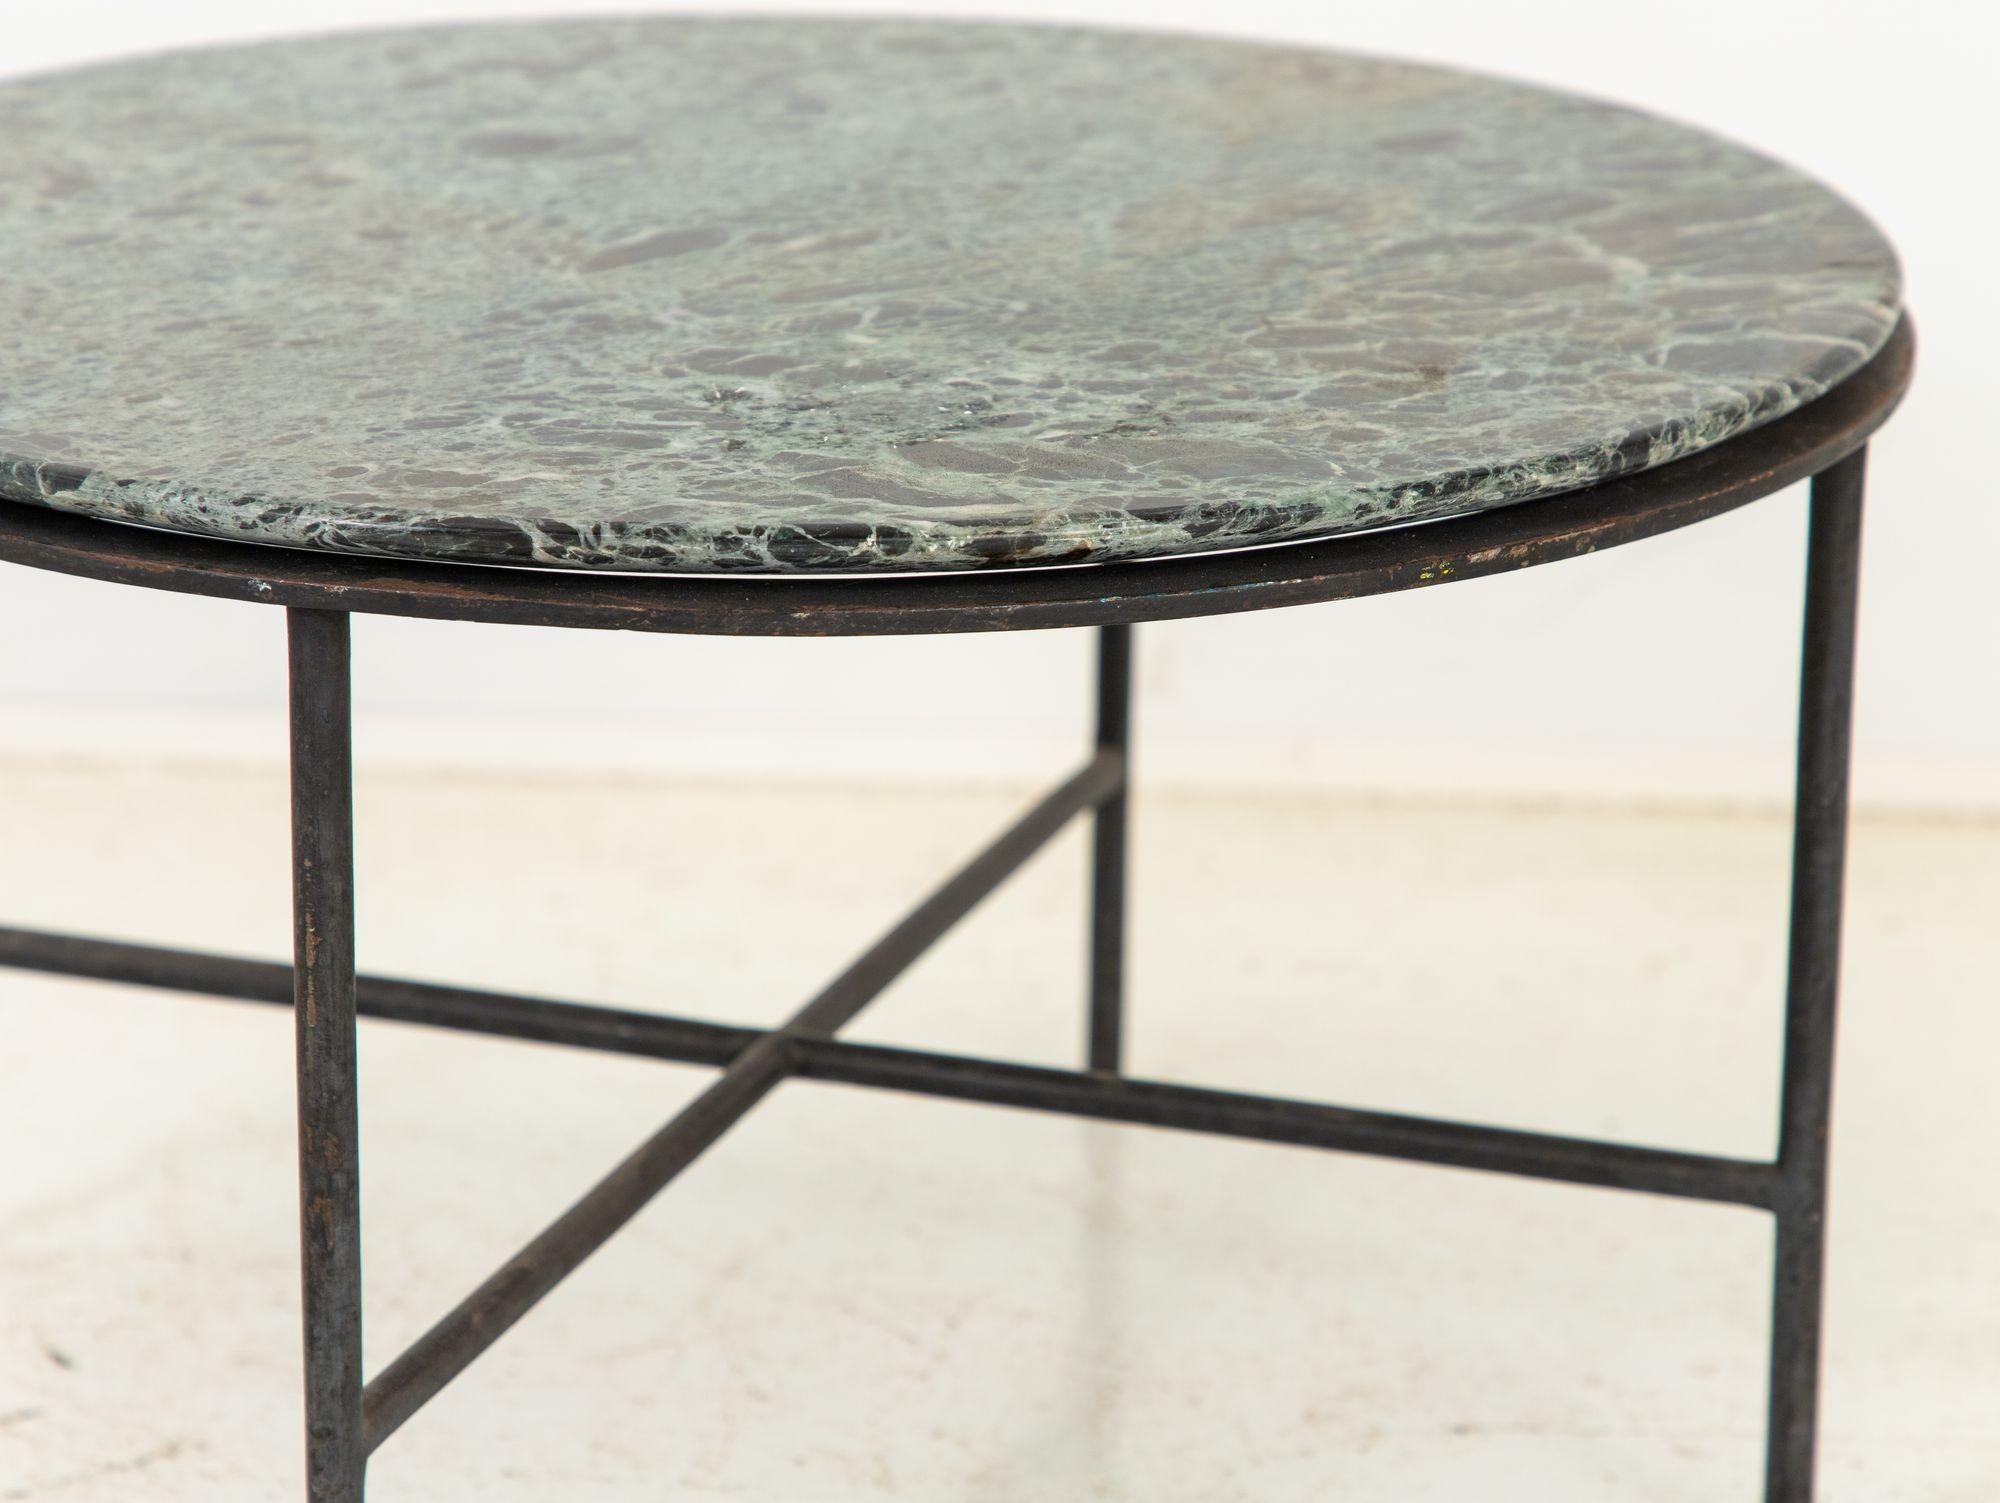 Round Iron base Cocktail Table with Green Marble Top, France 1960s For Sale 1